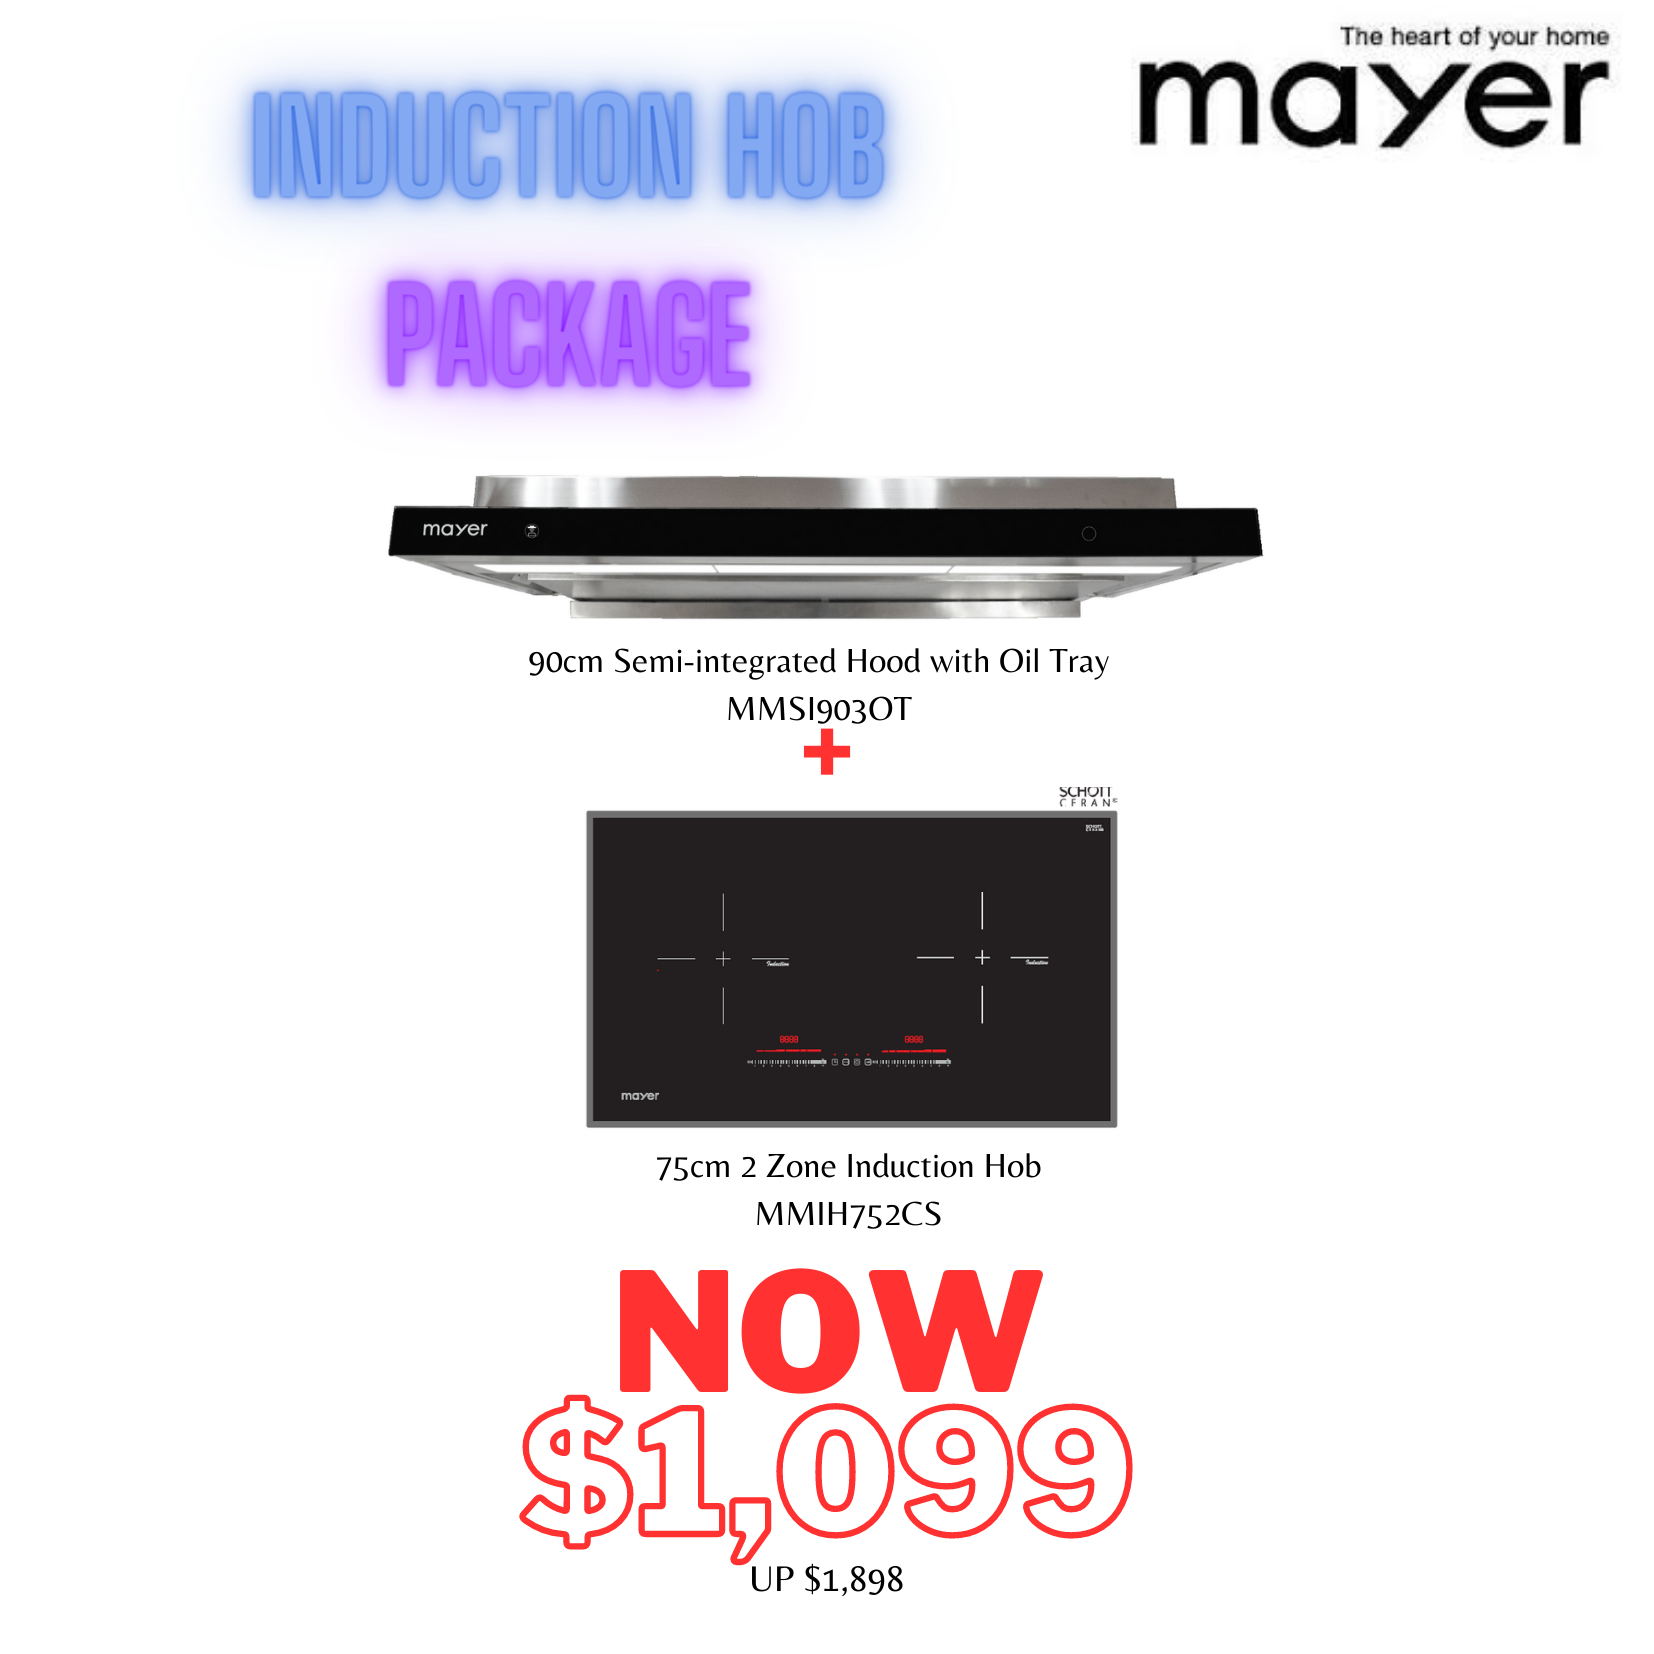 75cm 2 Zone Induction Hob with Slider + 90cm Semi-integrated Hood with Oil Tray MMIH752CS+MMSI903OT